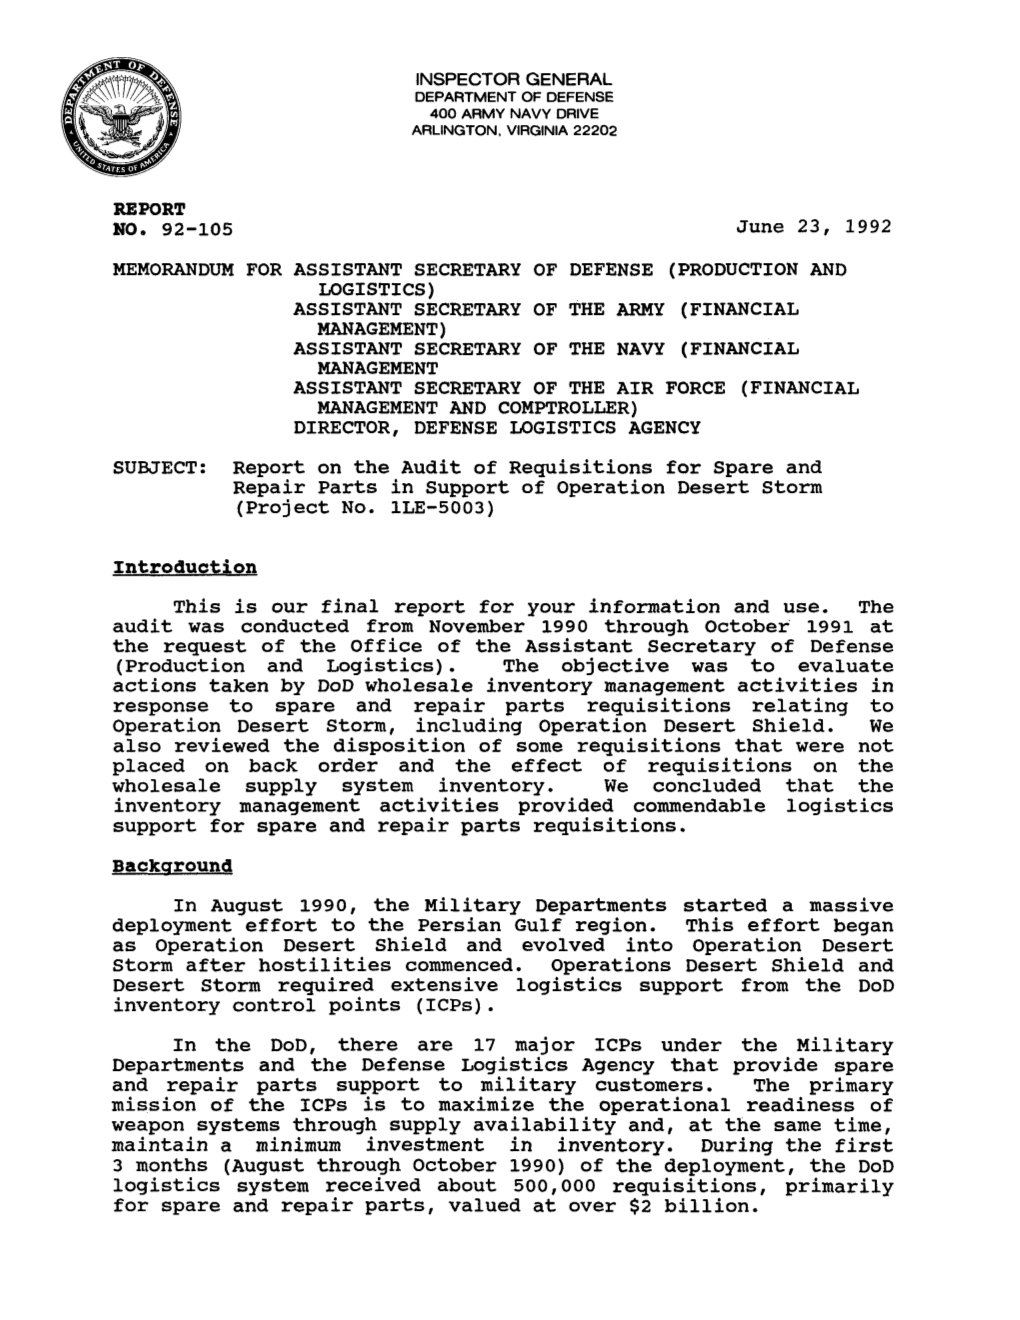 Report on the Audit of Requisitions for Spare and Repair Parts in Support of Operation Desert Storm (Project No